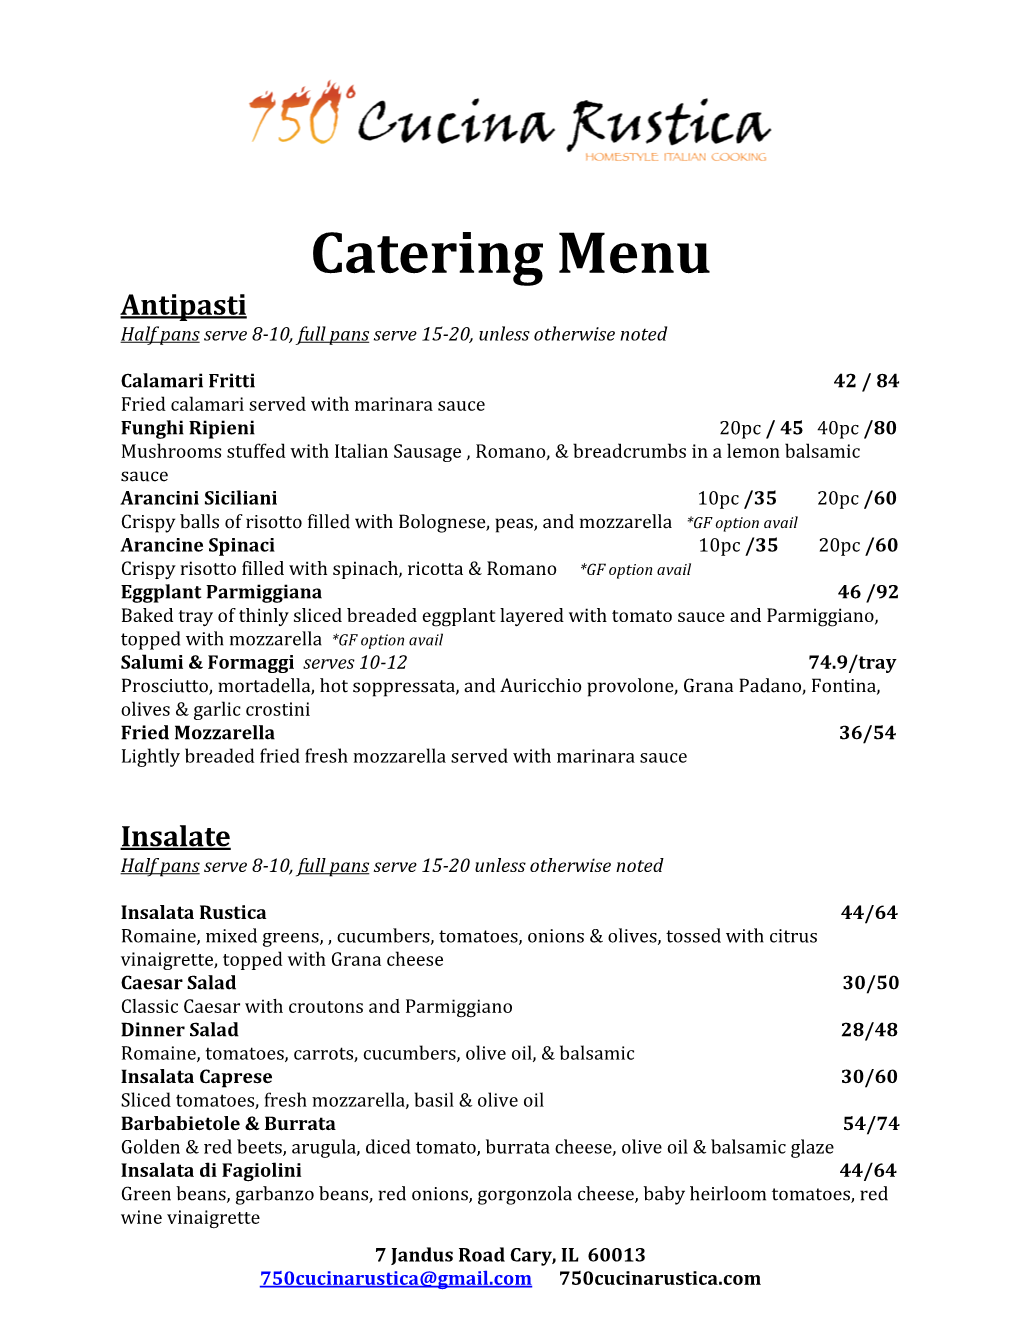 Catering Menu Antipasti Half Pans Serve 8-10, Full Pans Serve 15-20, Unless Otherwise Noted